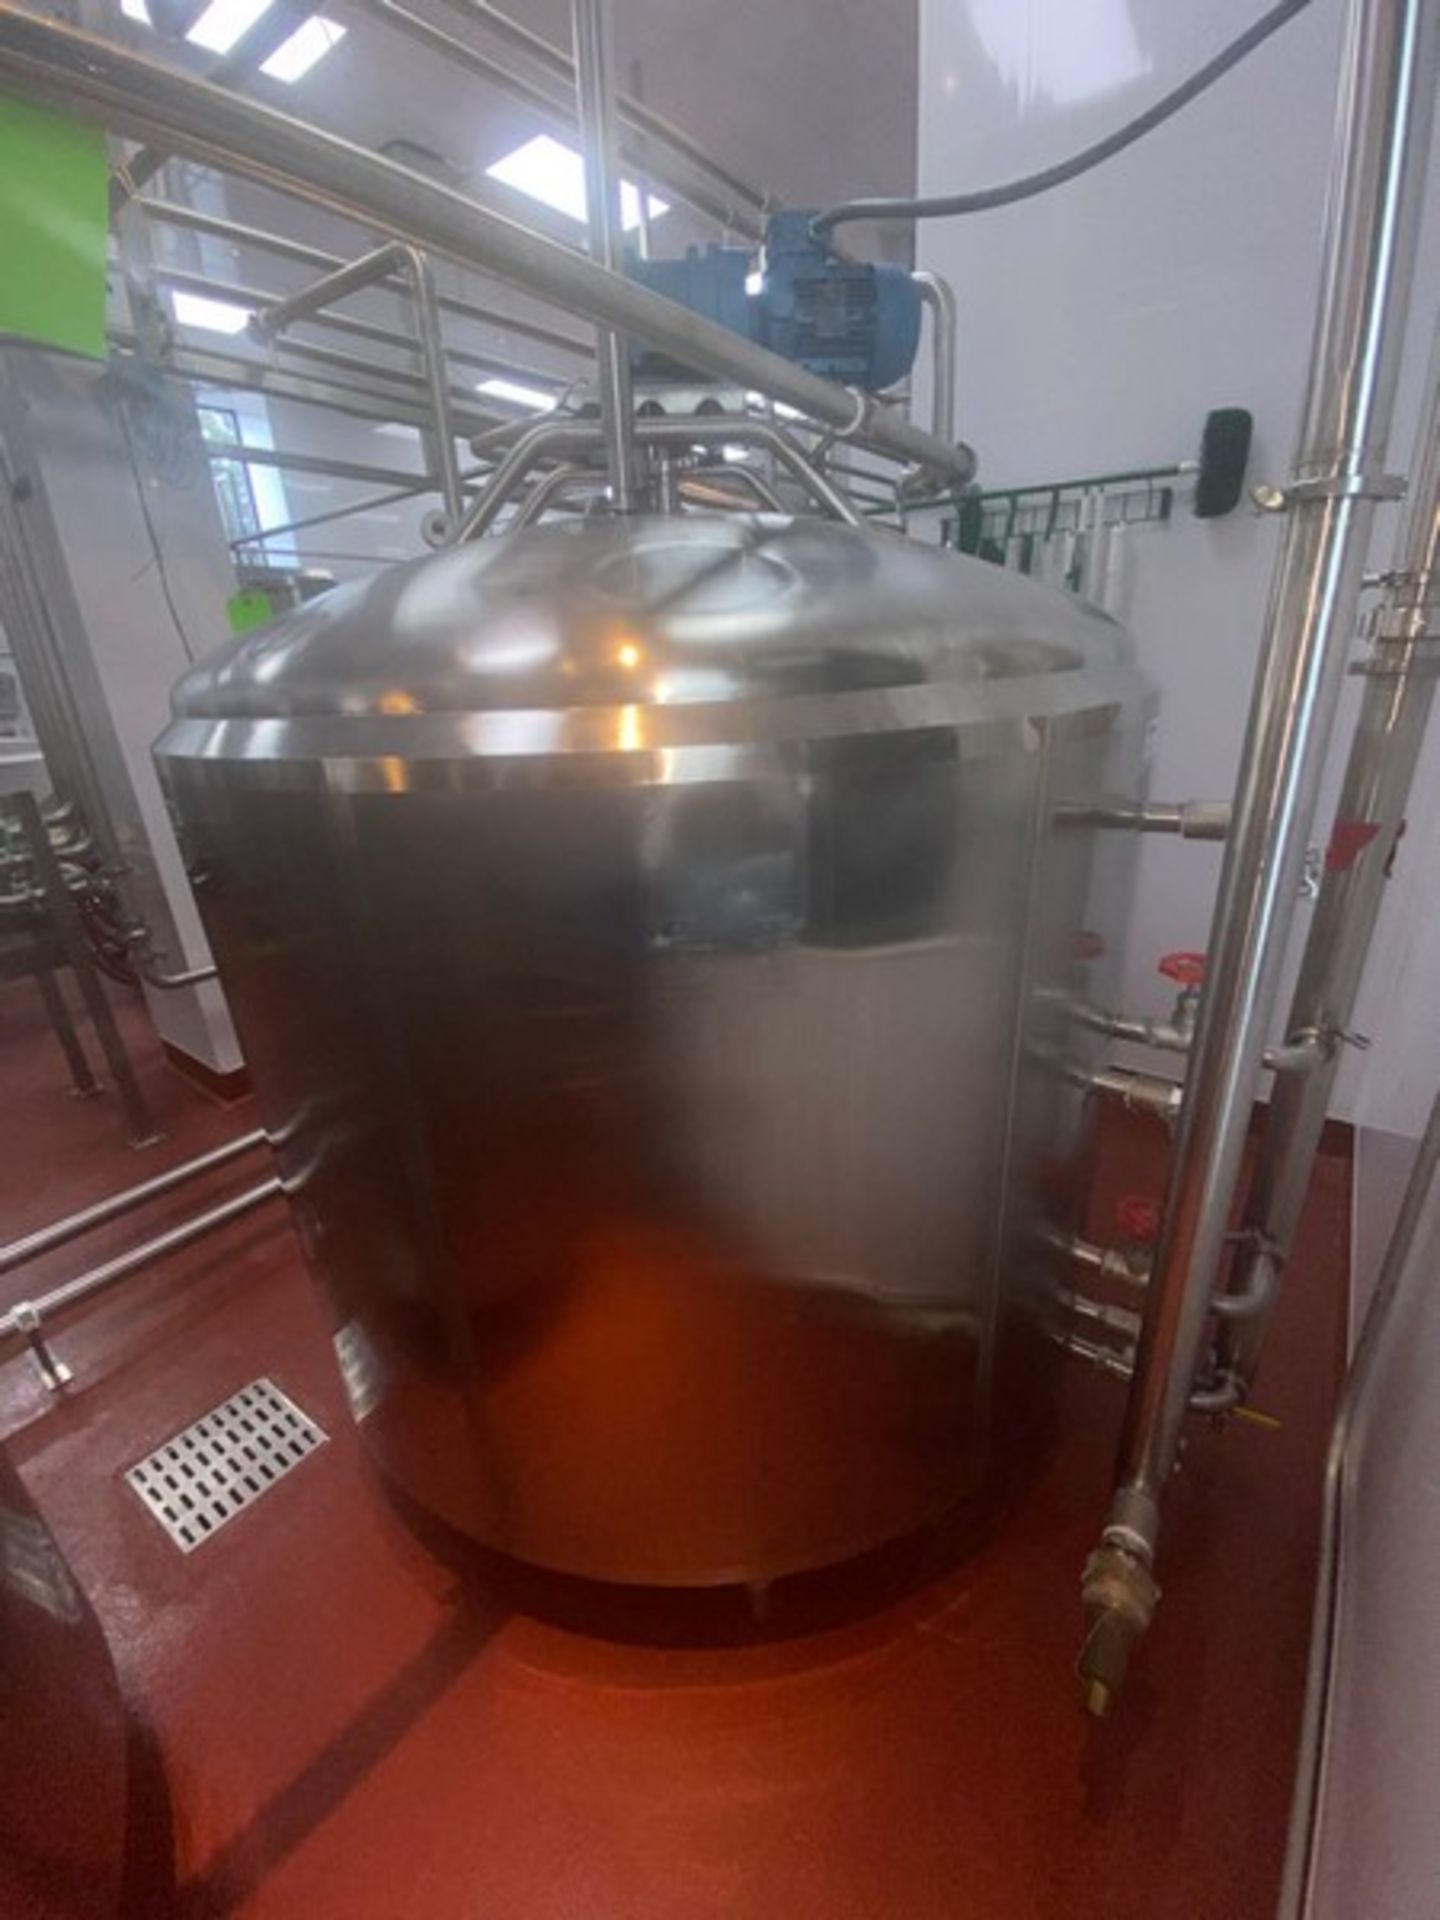 Cherry-Burrell 500 gal. S/S Processor, Fully Jacketed with Sides & Bottom Jacket, with S/S - Image 8 of 15